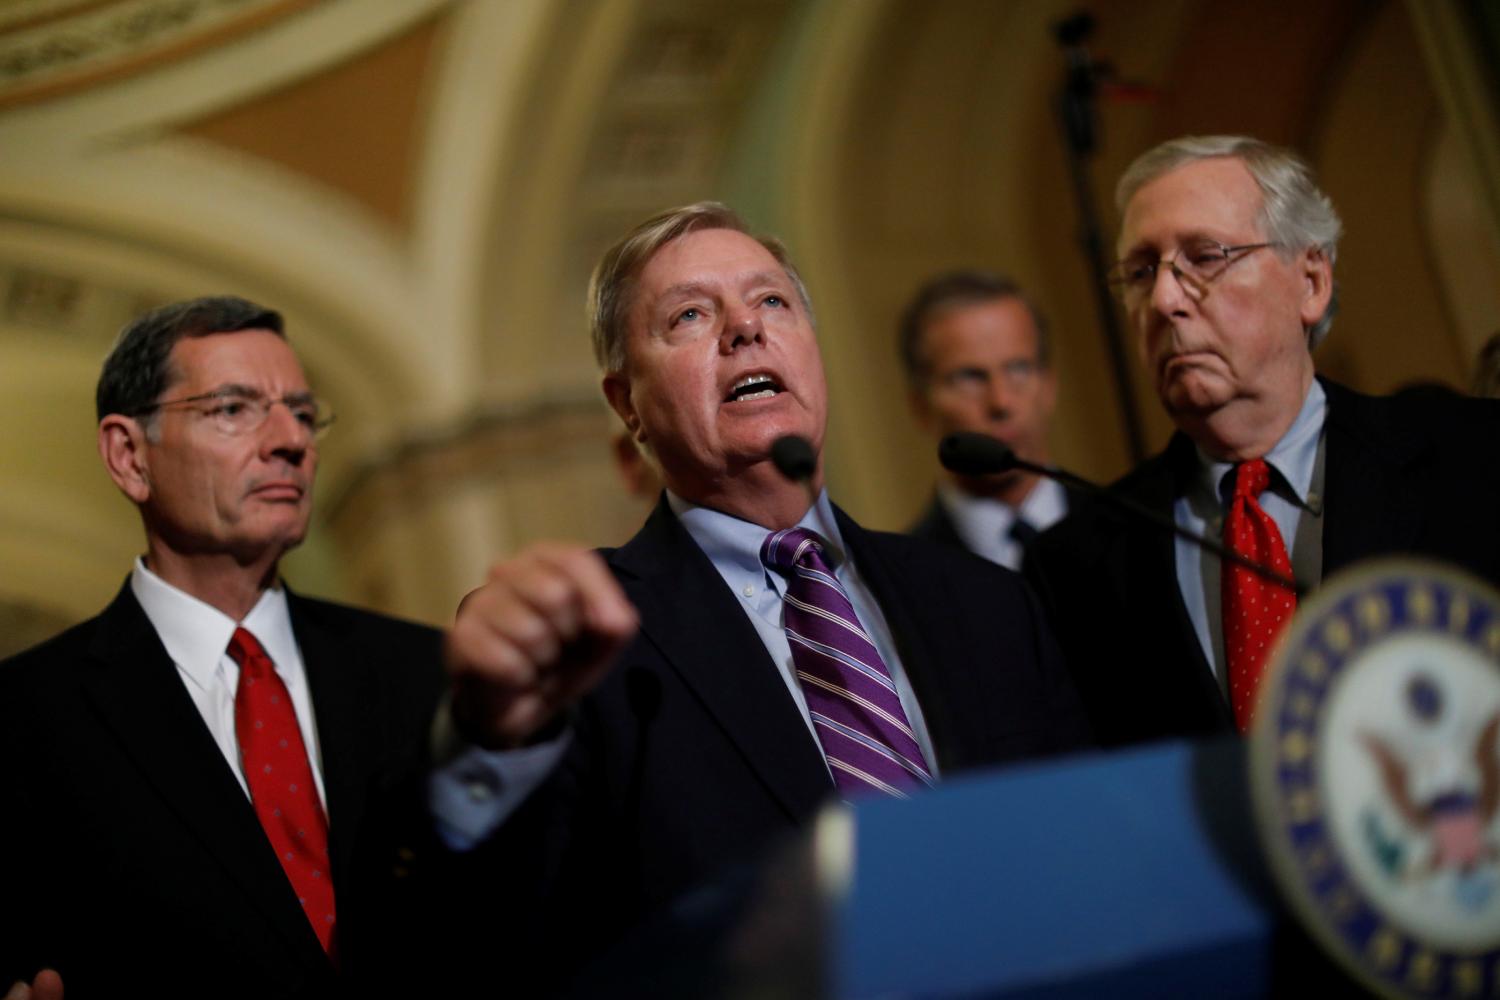 Sen. Lindsey Graham (R-SC), accompanied by Sen. John Barrasso (R-WY), and Senate Majority Leader Mitch McConnell, speaks with reporters following the party luncheons on Capitol Hill in Washington, U.S., September 19, 2017. REUTERS/Aaron P. Bernstein - RC1D74AF44C0